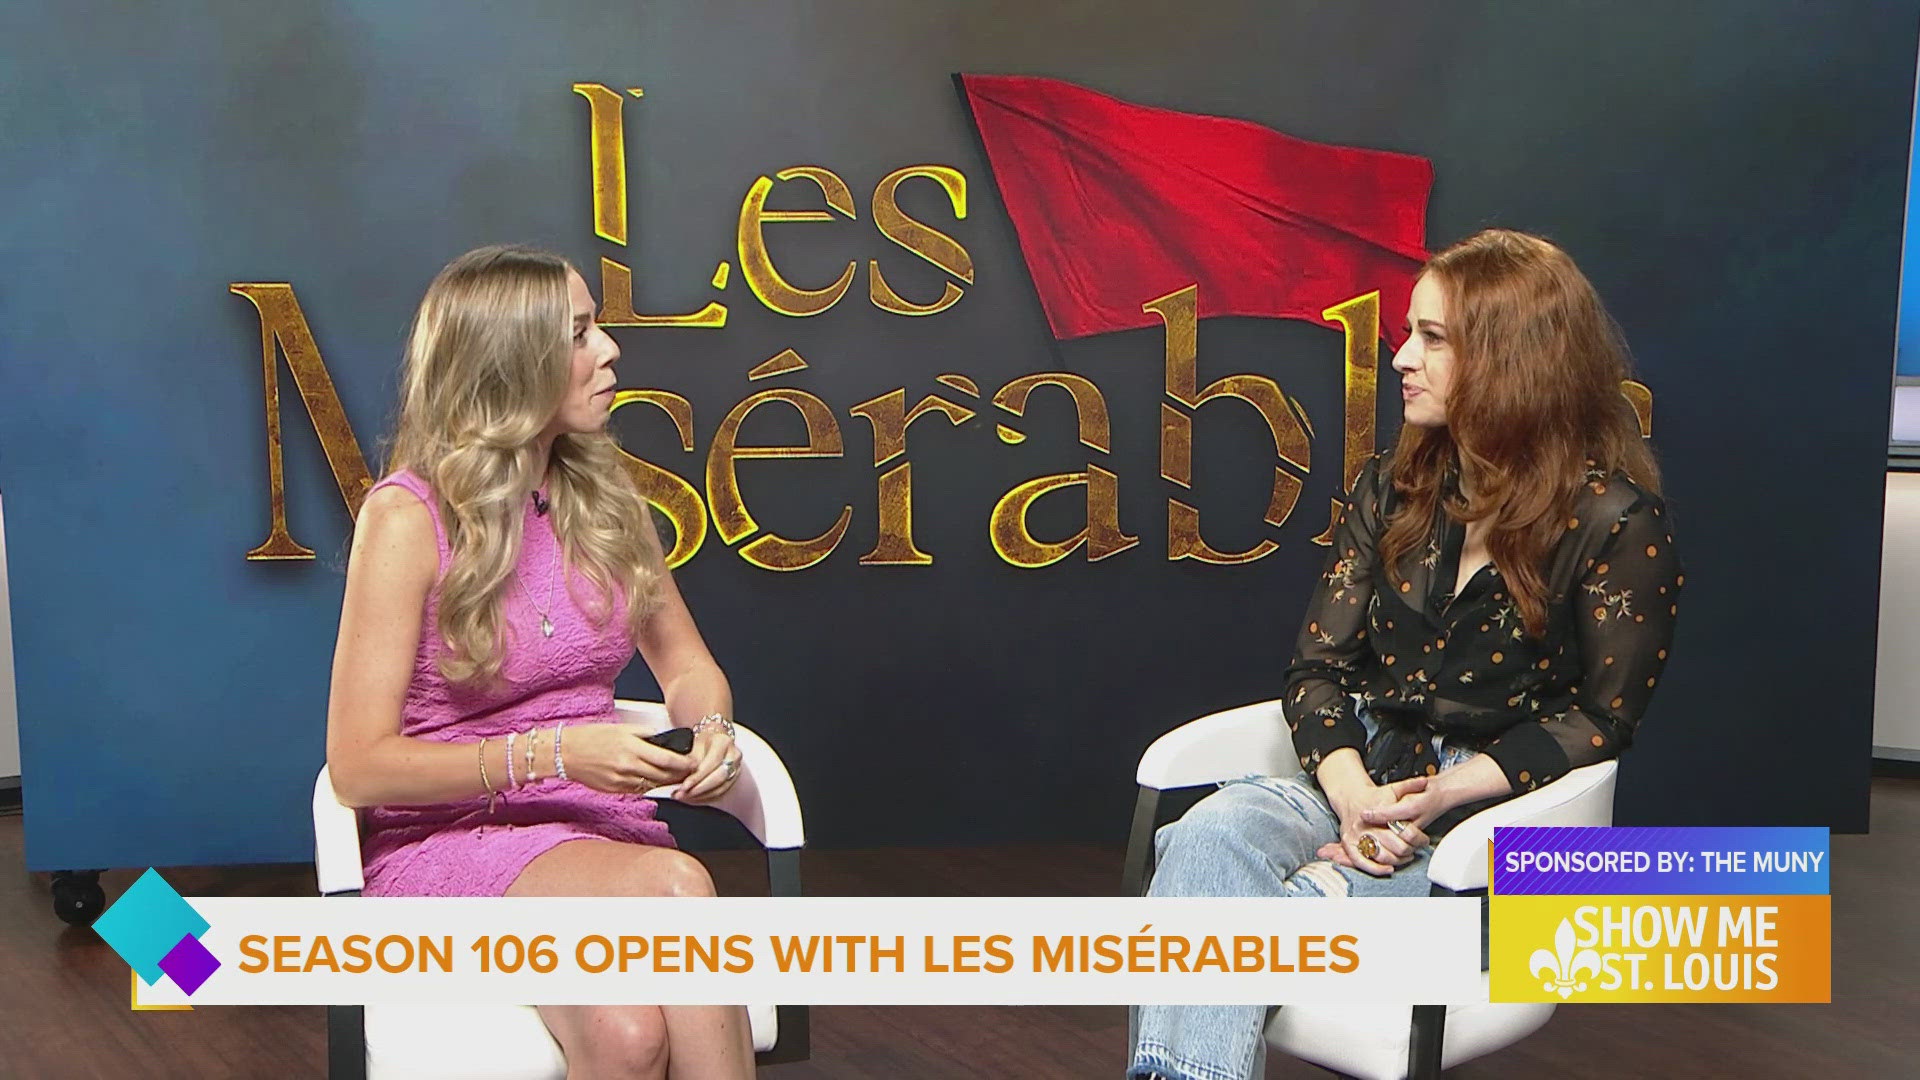 Kickoff summer at The Muny and watch actress Teal Wicks star as Fantine in Les Misérables.